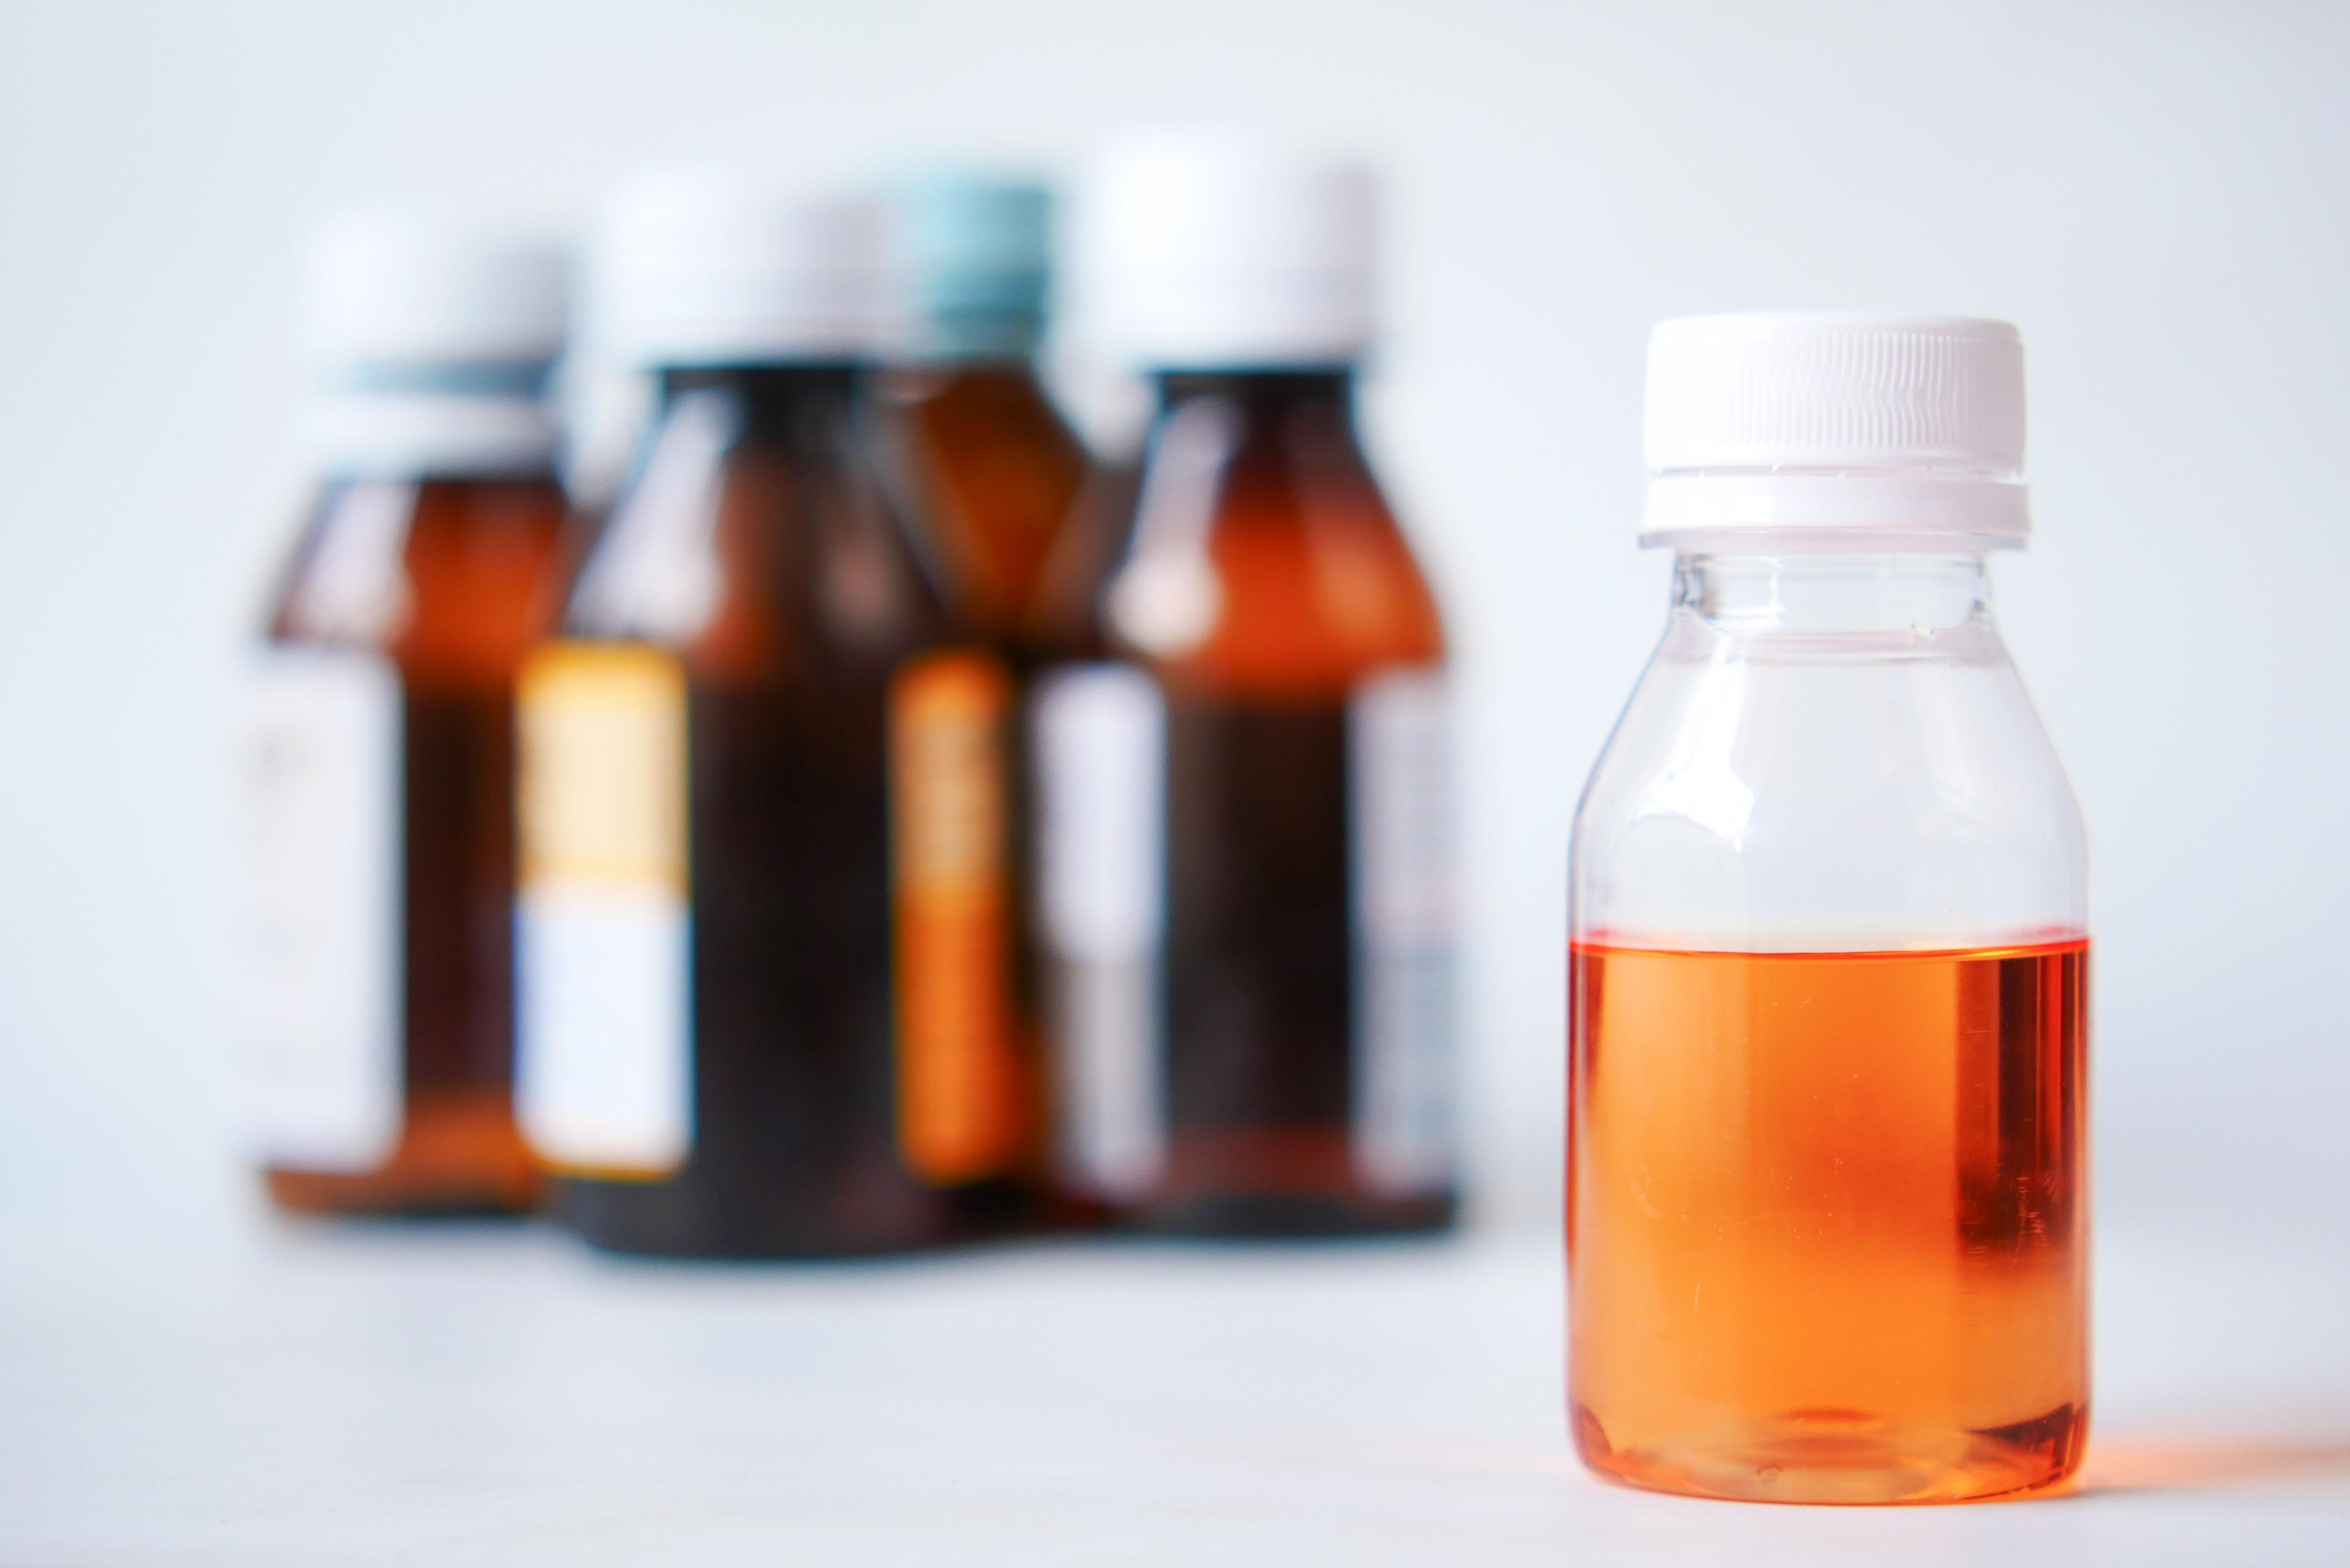 What is lean? Get the facts about codeine cough syrup